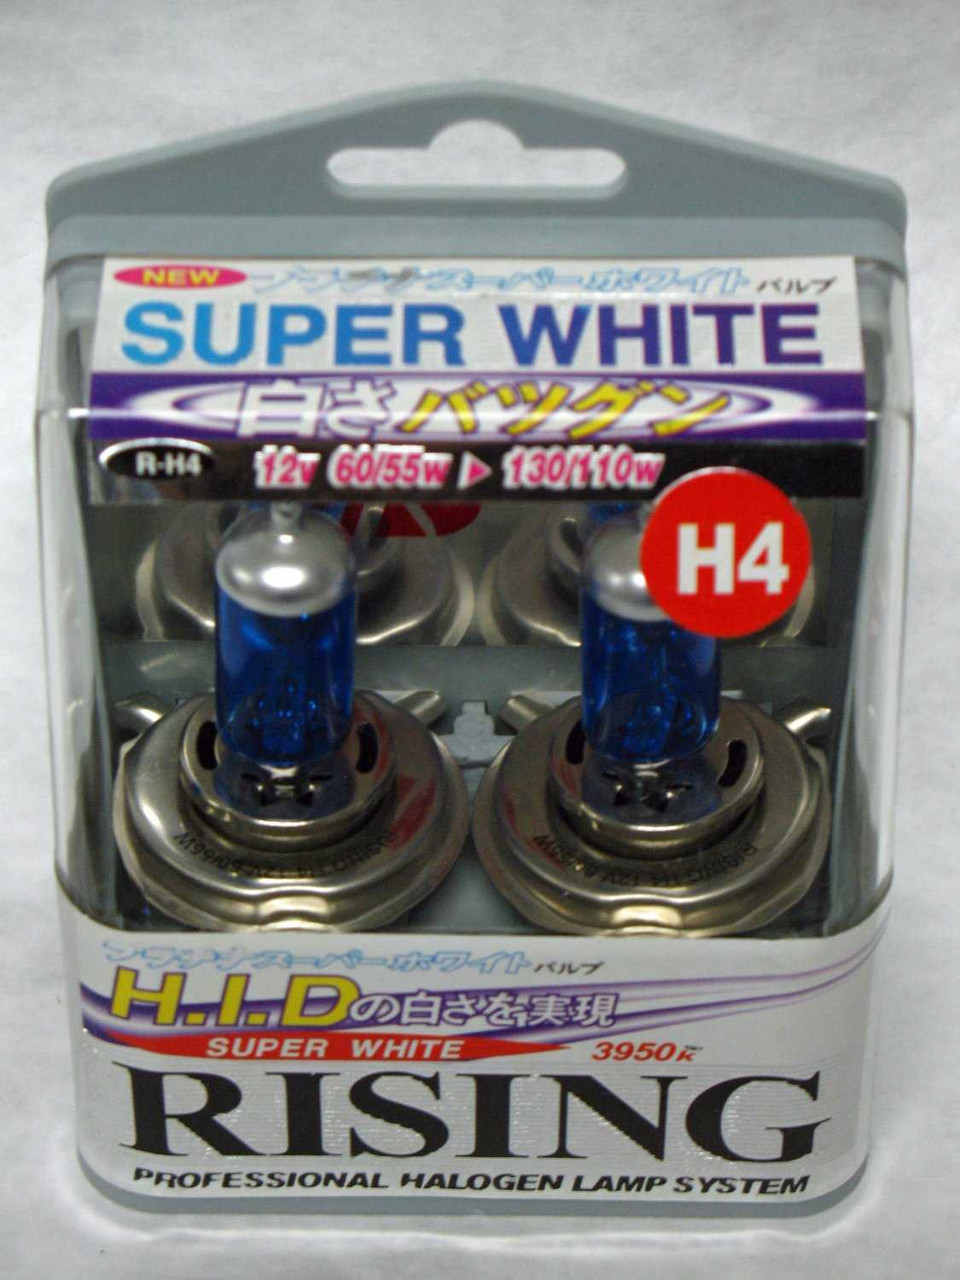 9003 Rising Super White 3950K 65W Halogen Replacement Light Bulb Set of 2 from Japan